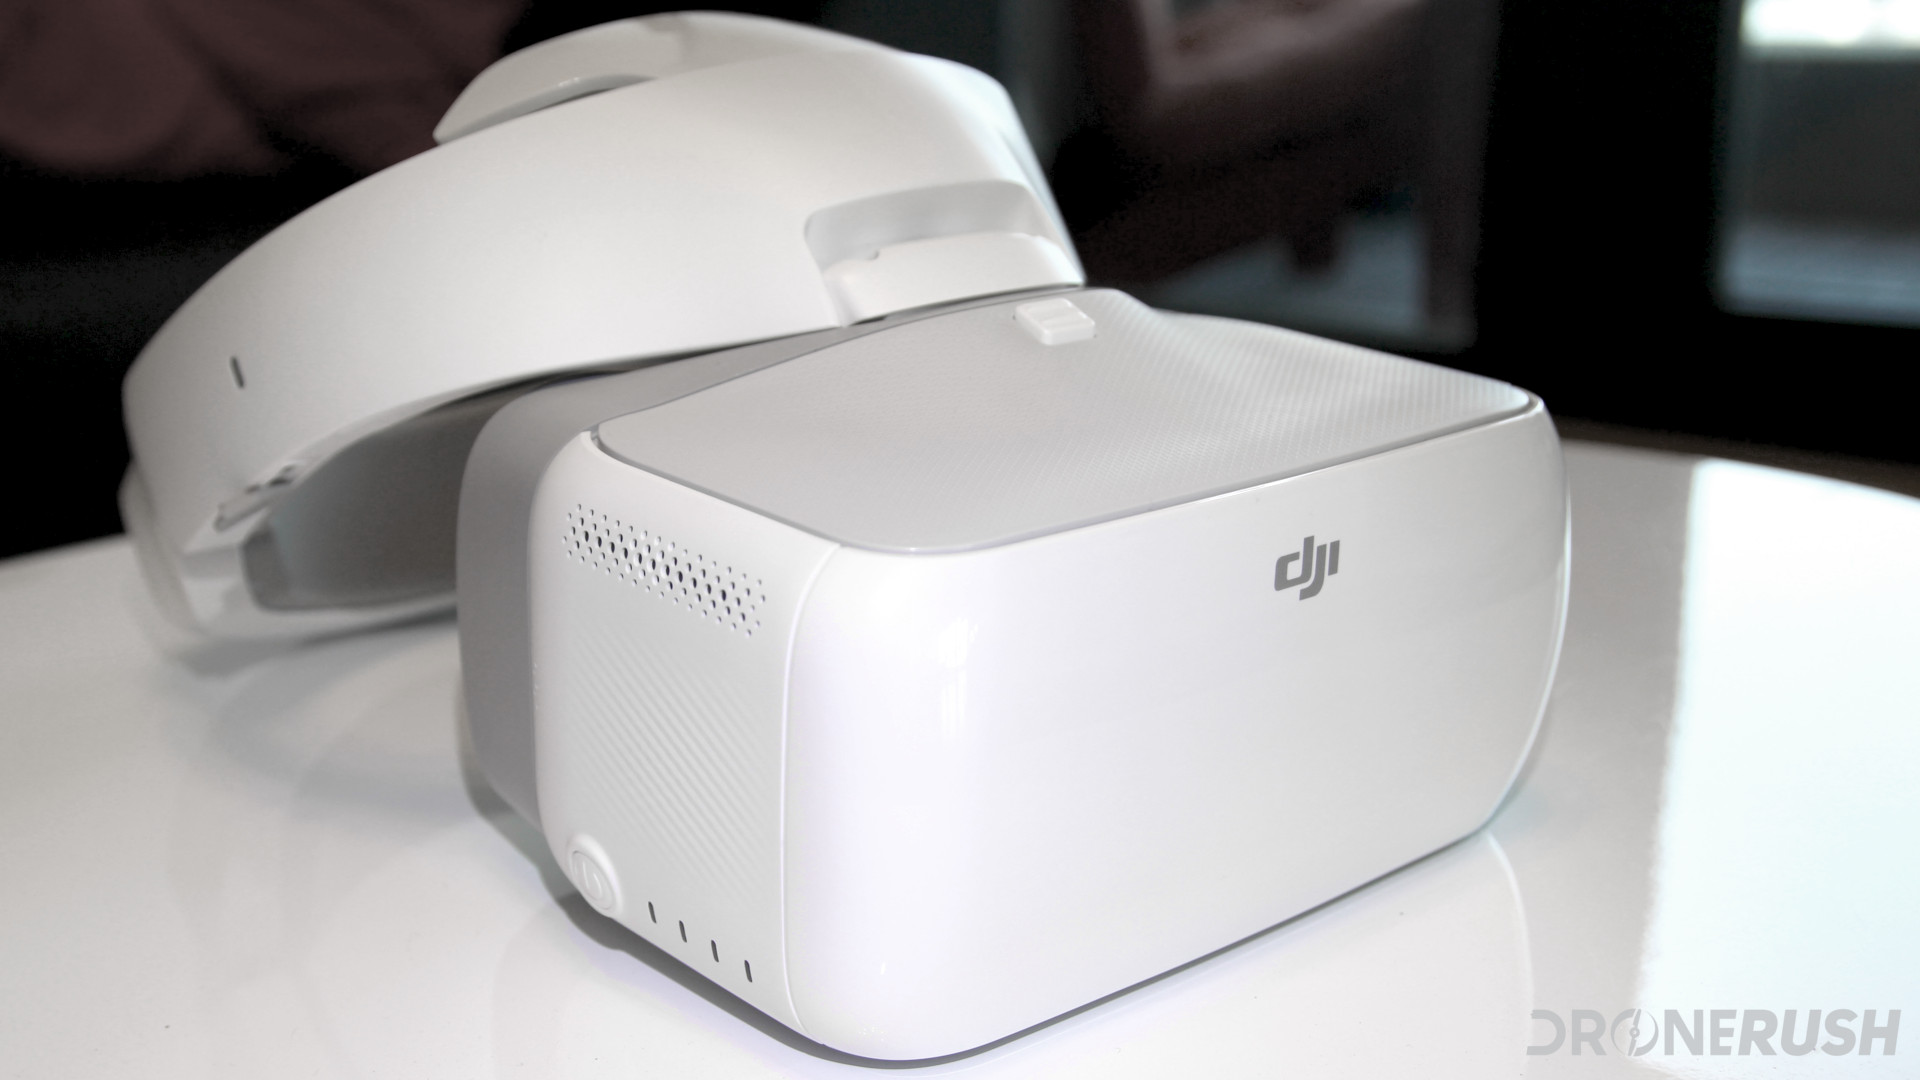 Here is an image of the DJI Goggles sitting on a white glossy table, what better way to introduce our DJI Goggles with DJI Mavic Pro VR headset FPV goggles article?